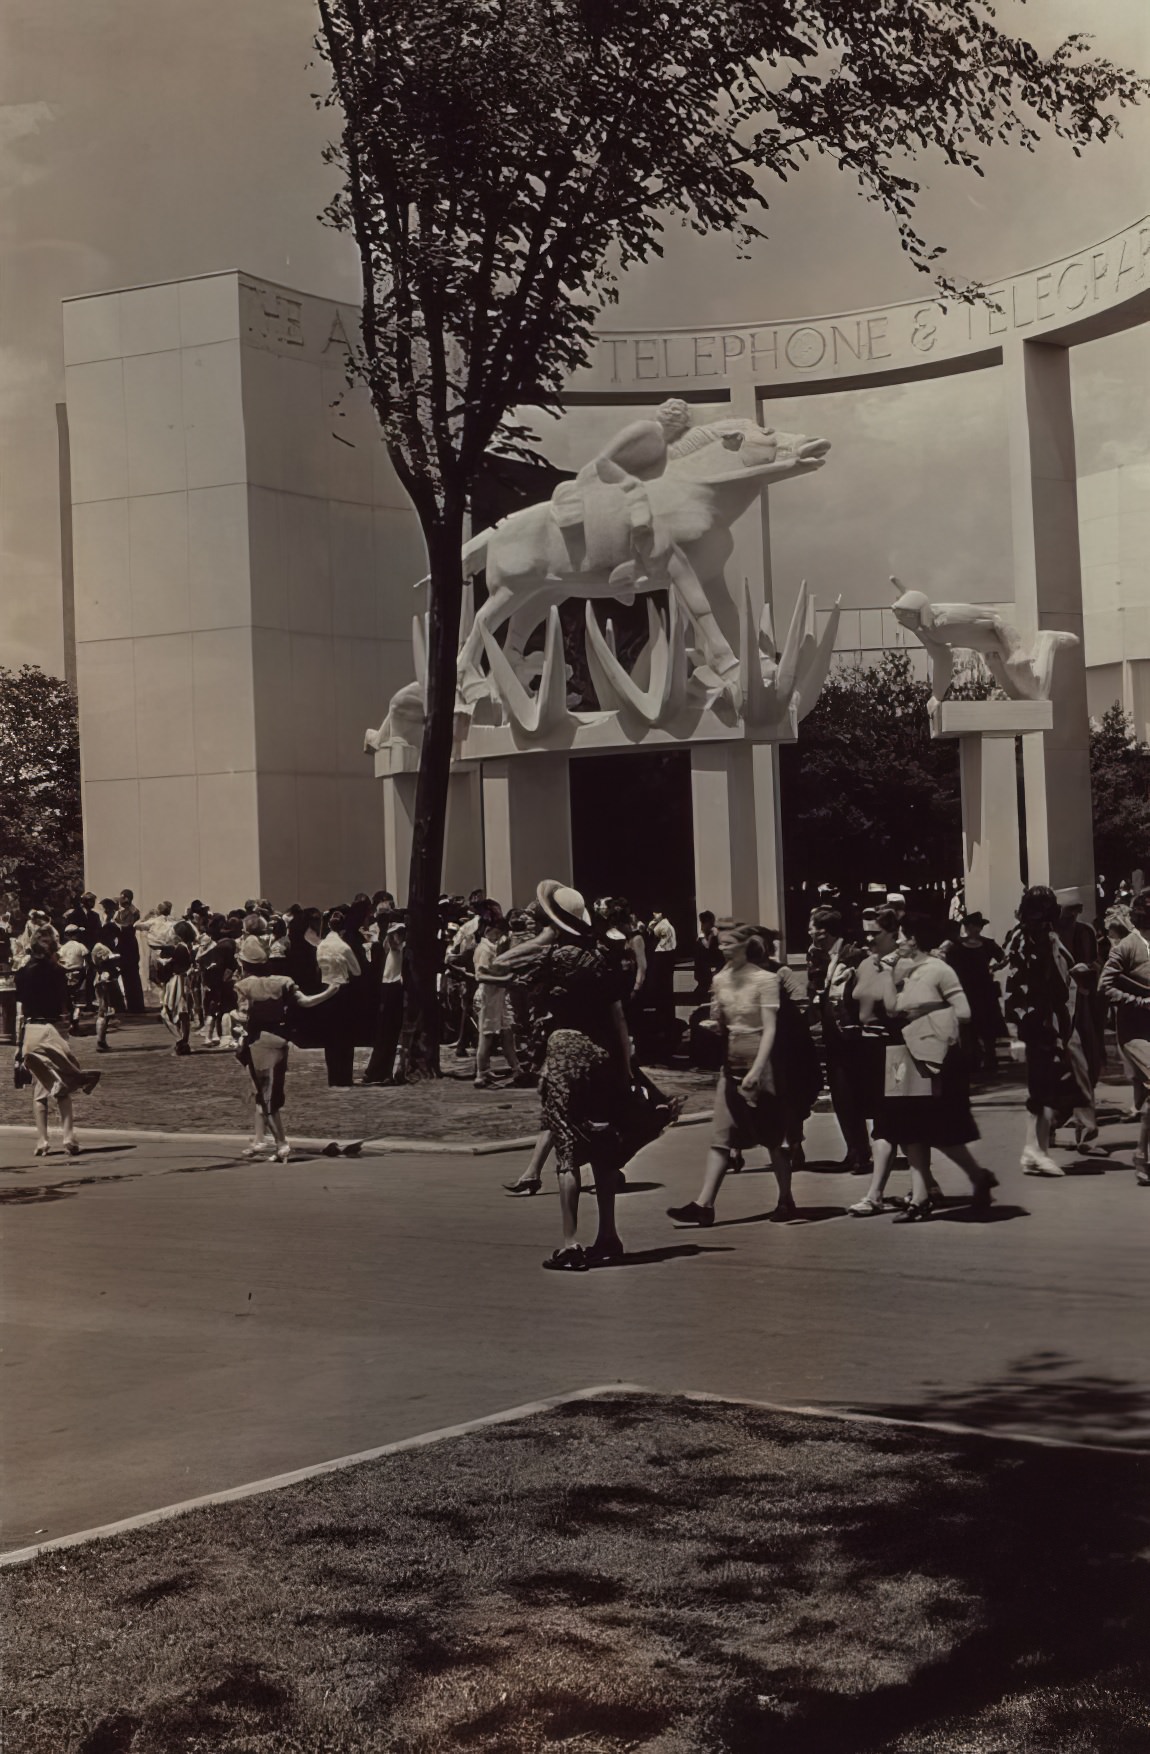 American Telephone And Telegraph Company Exhibit, New York World'S Fair Of 1939-40, Flushing Meadows Park, Queens.